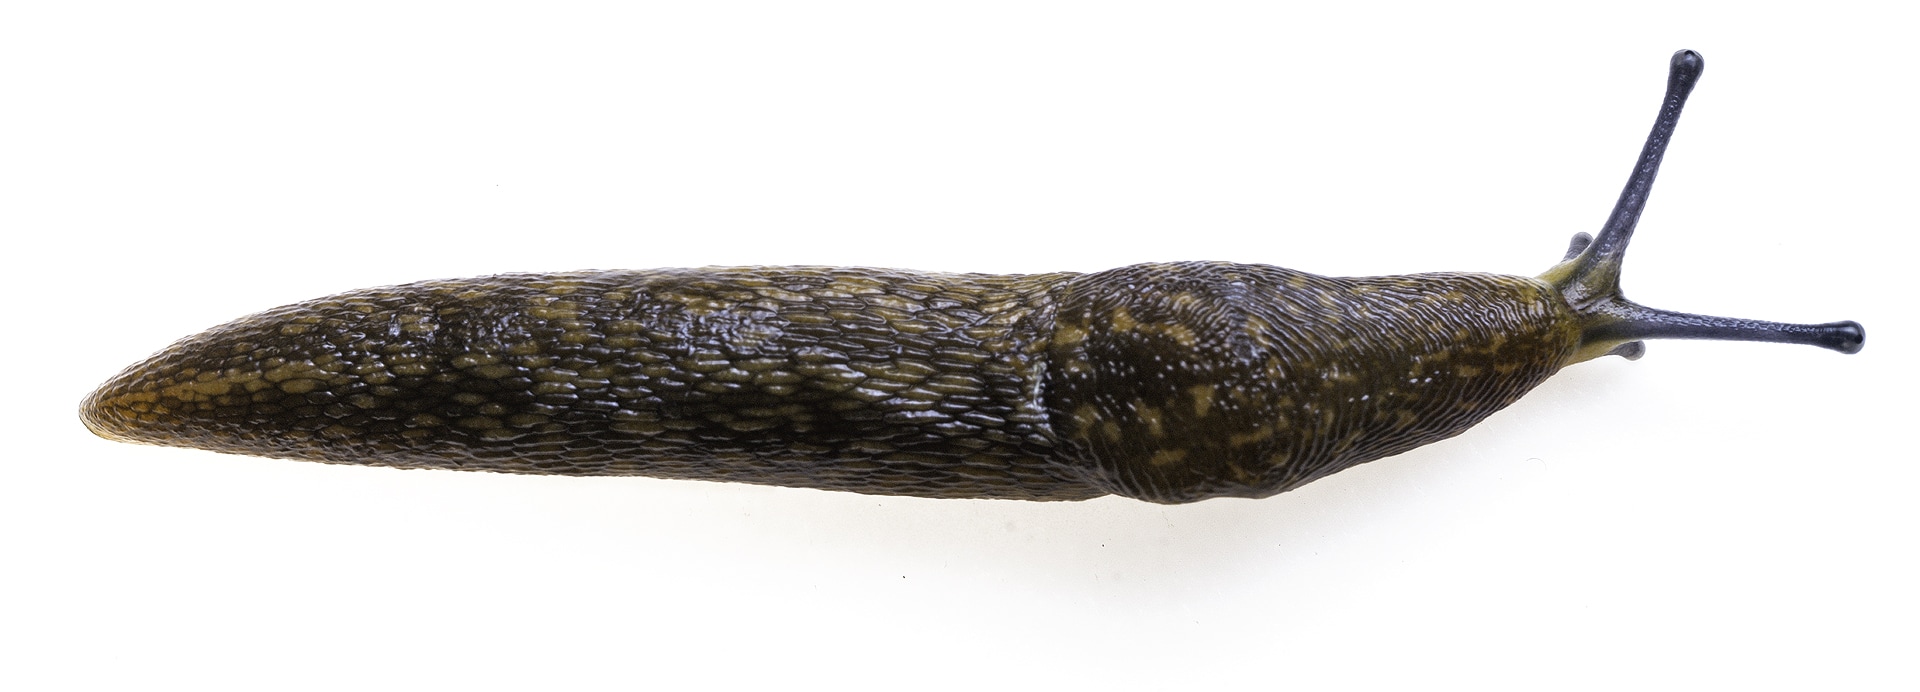 Lateral image of a spotted Ariolimax columbianus